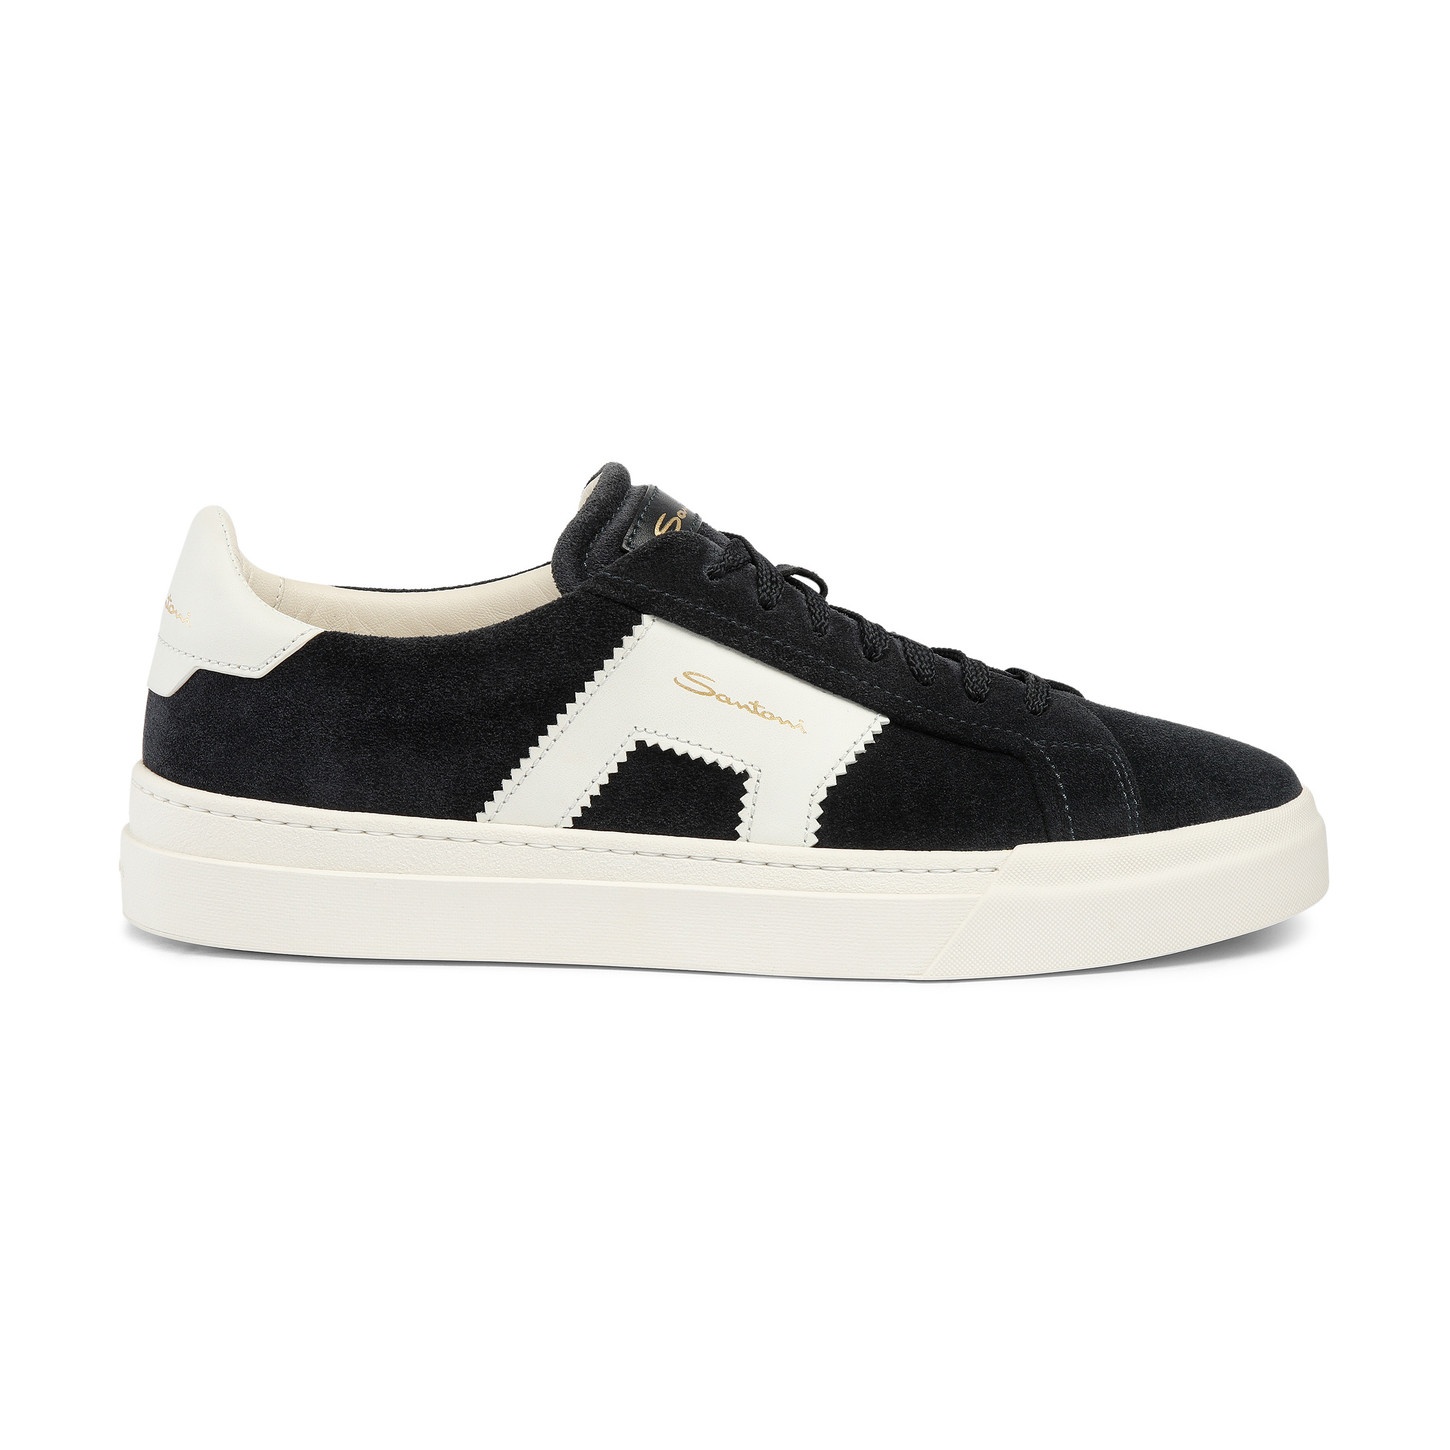 Men’s blue and white suede and leather double buckle sneaker - 1